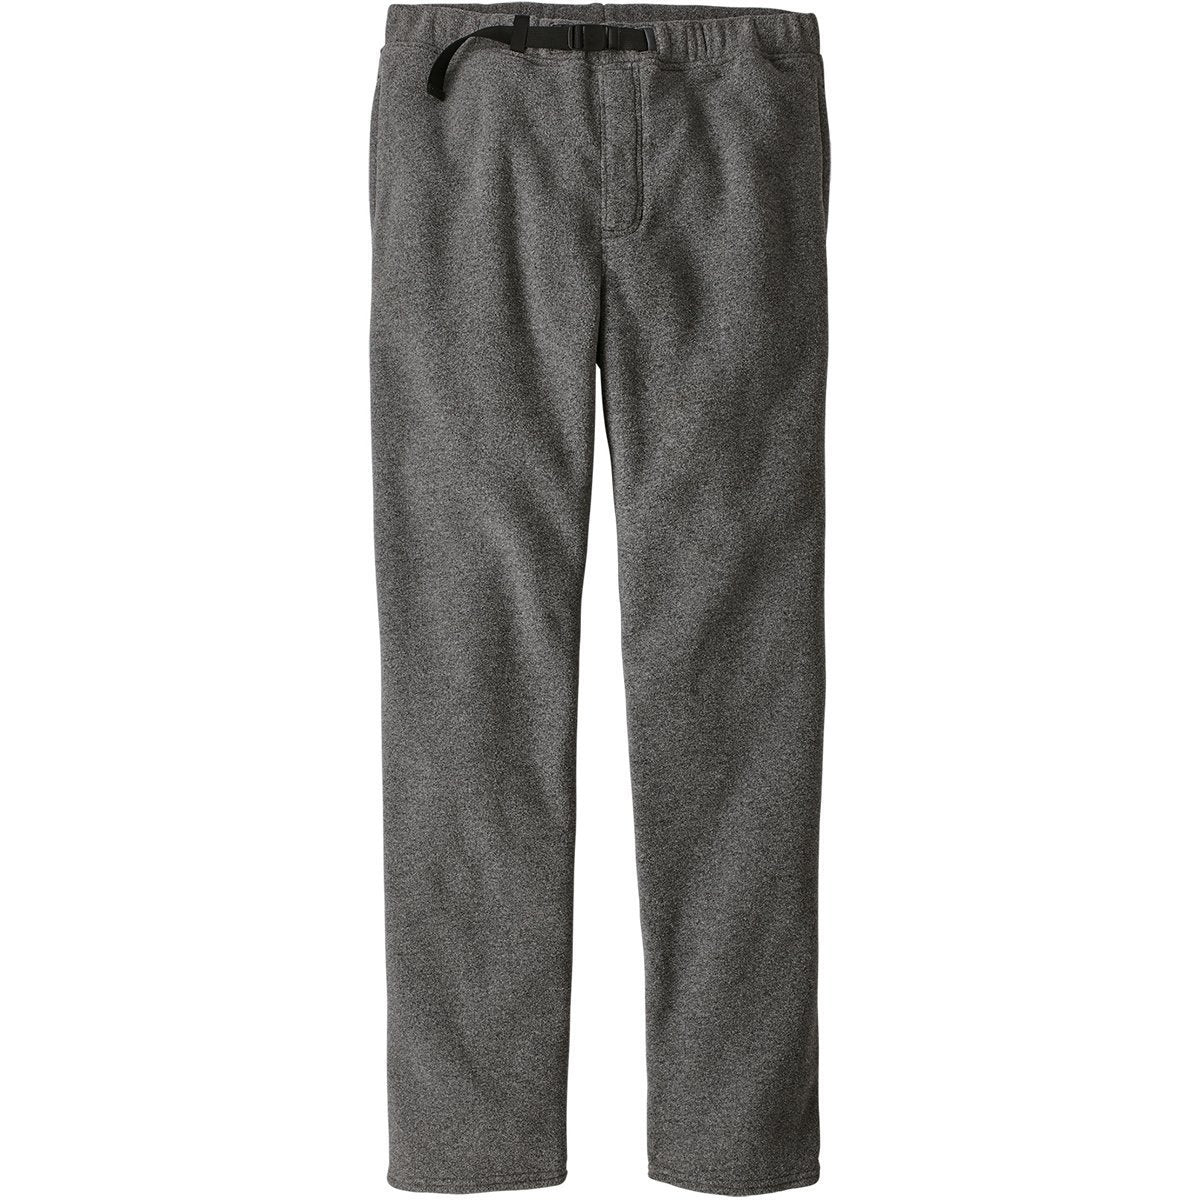 Men's Lightweight Synchilla Snap-T Pants - Gearhead Outfitters